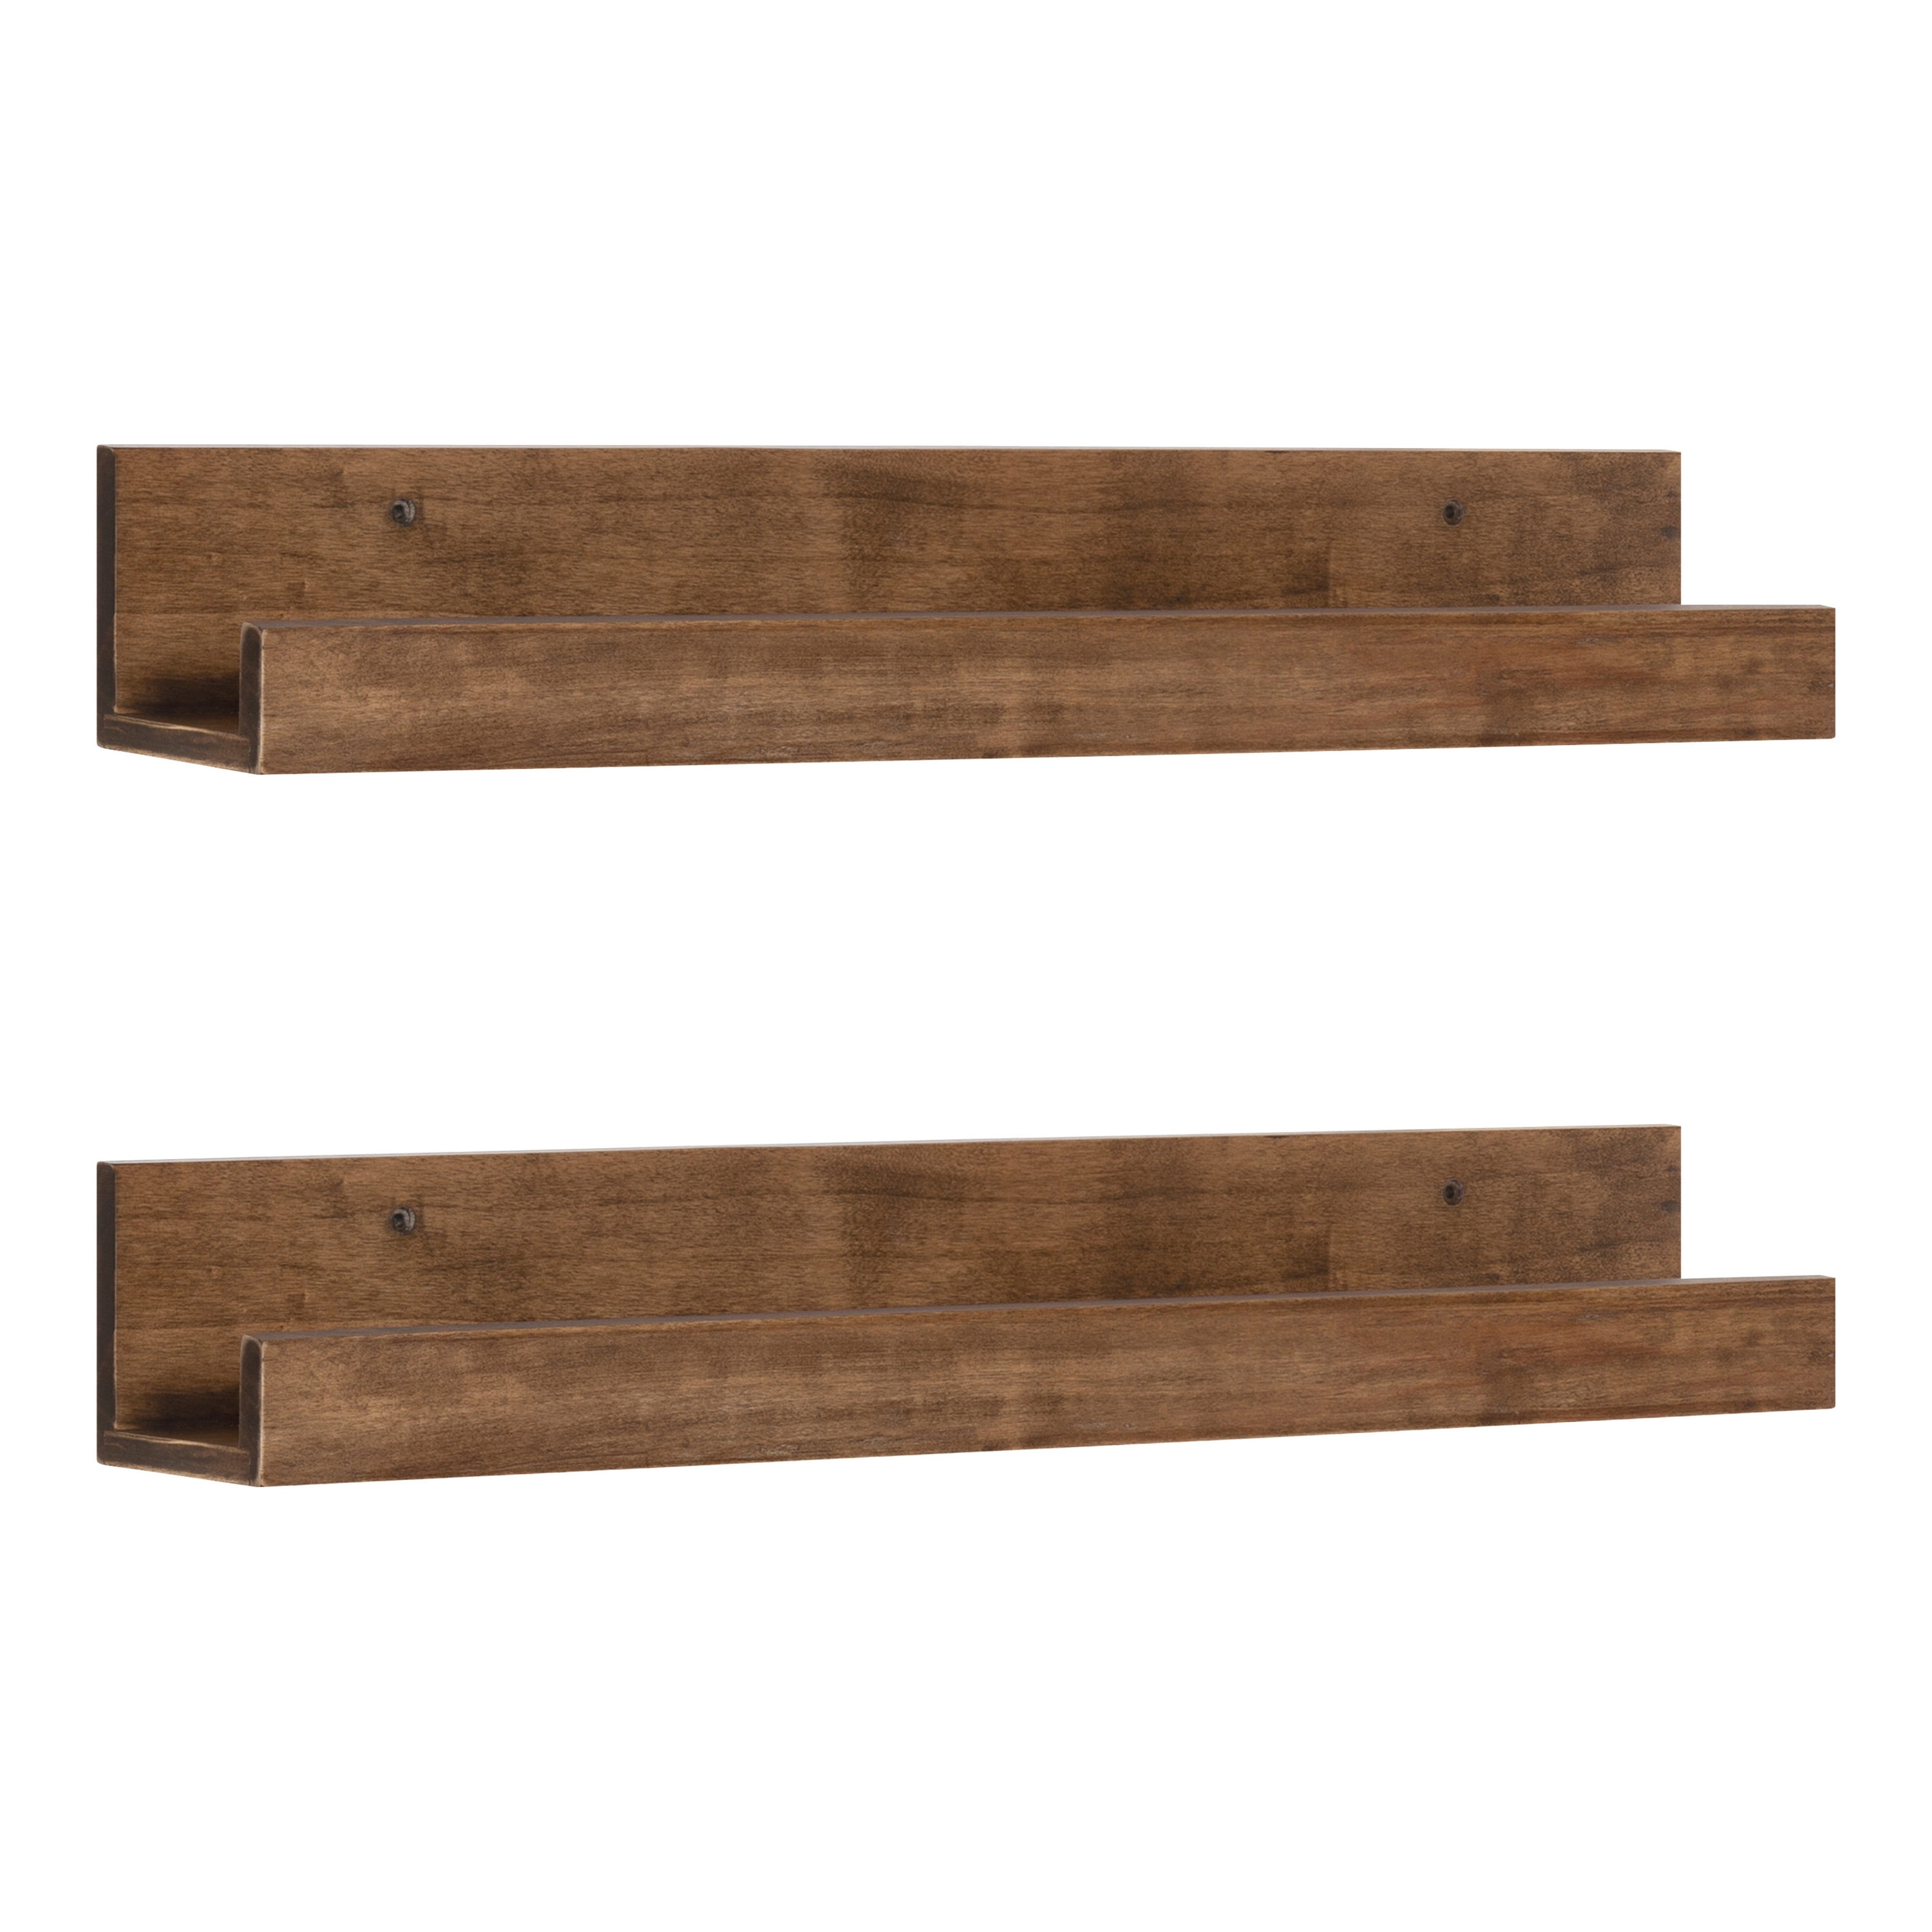 Kate and Laurel Rustic Brown Wood Floating Shelf 24-in L x 3.5-in D (2  Decorative Shelves) at